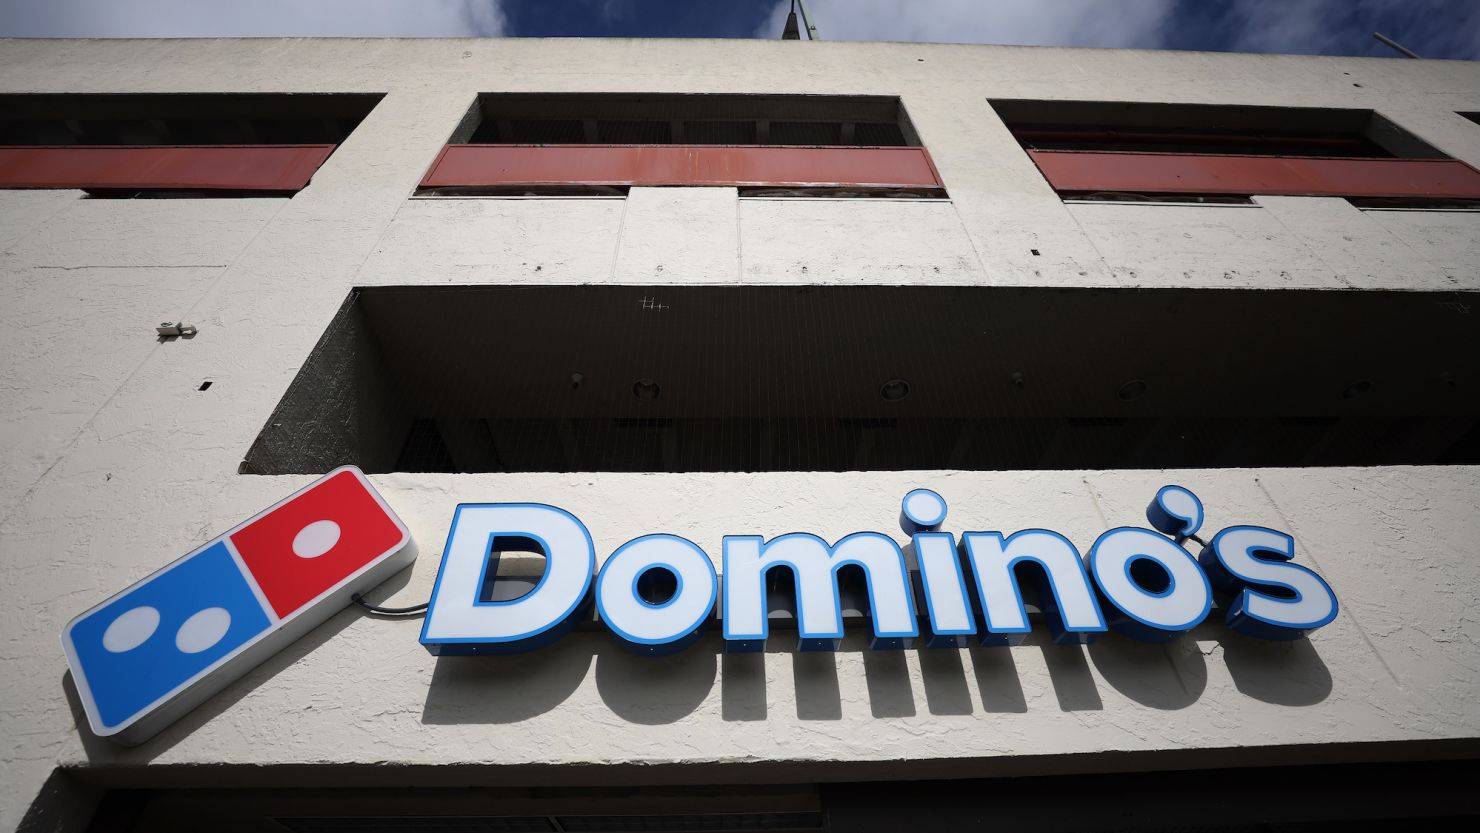 Domino's is tapping into tipping culture frustration to add sales and compete for delivery drivers.